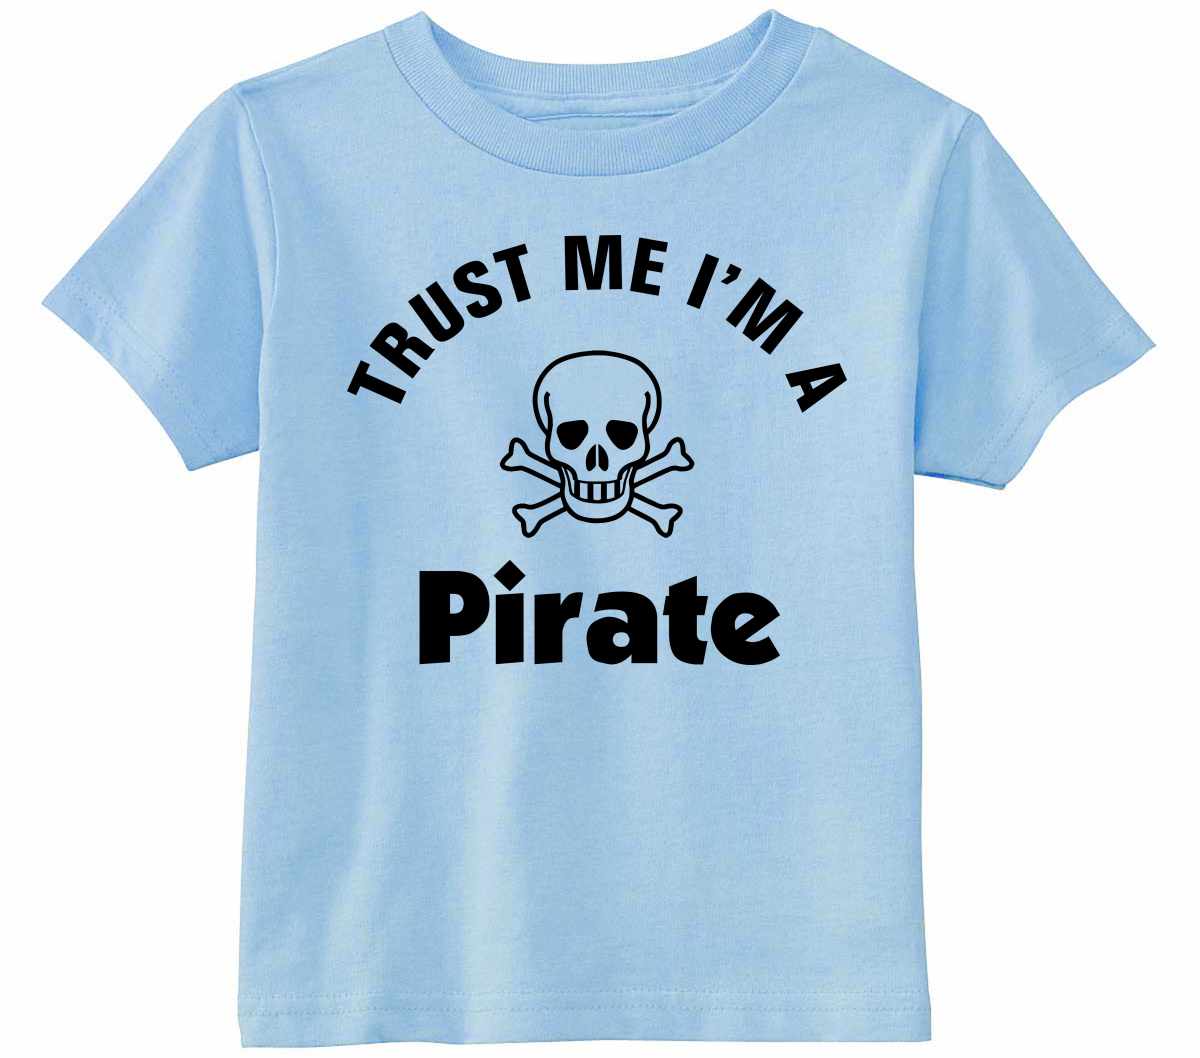 Trust Me I'm a Pirate Infant/Toddler 